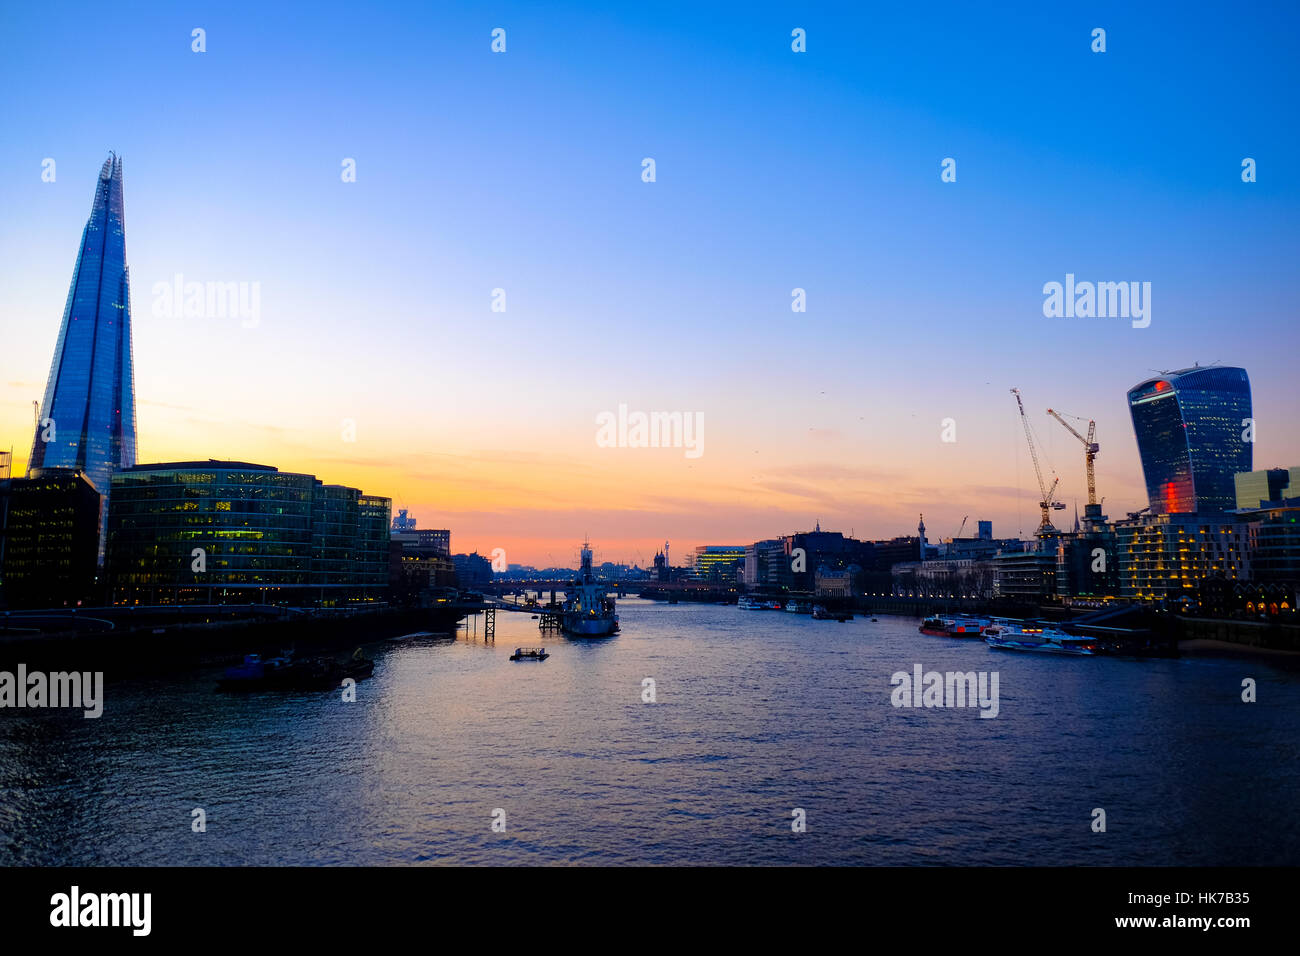 The sun sets over London's River Thames against a skyline of futuristic looking office buildings. Stock Photo